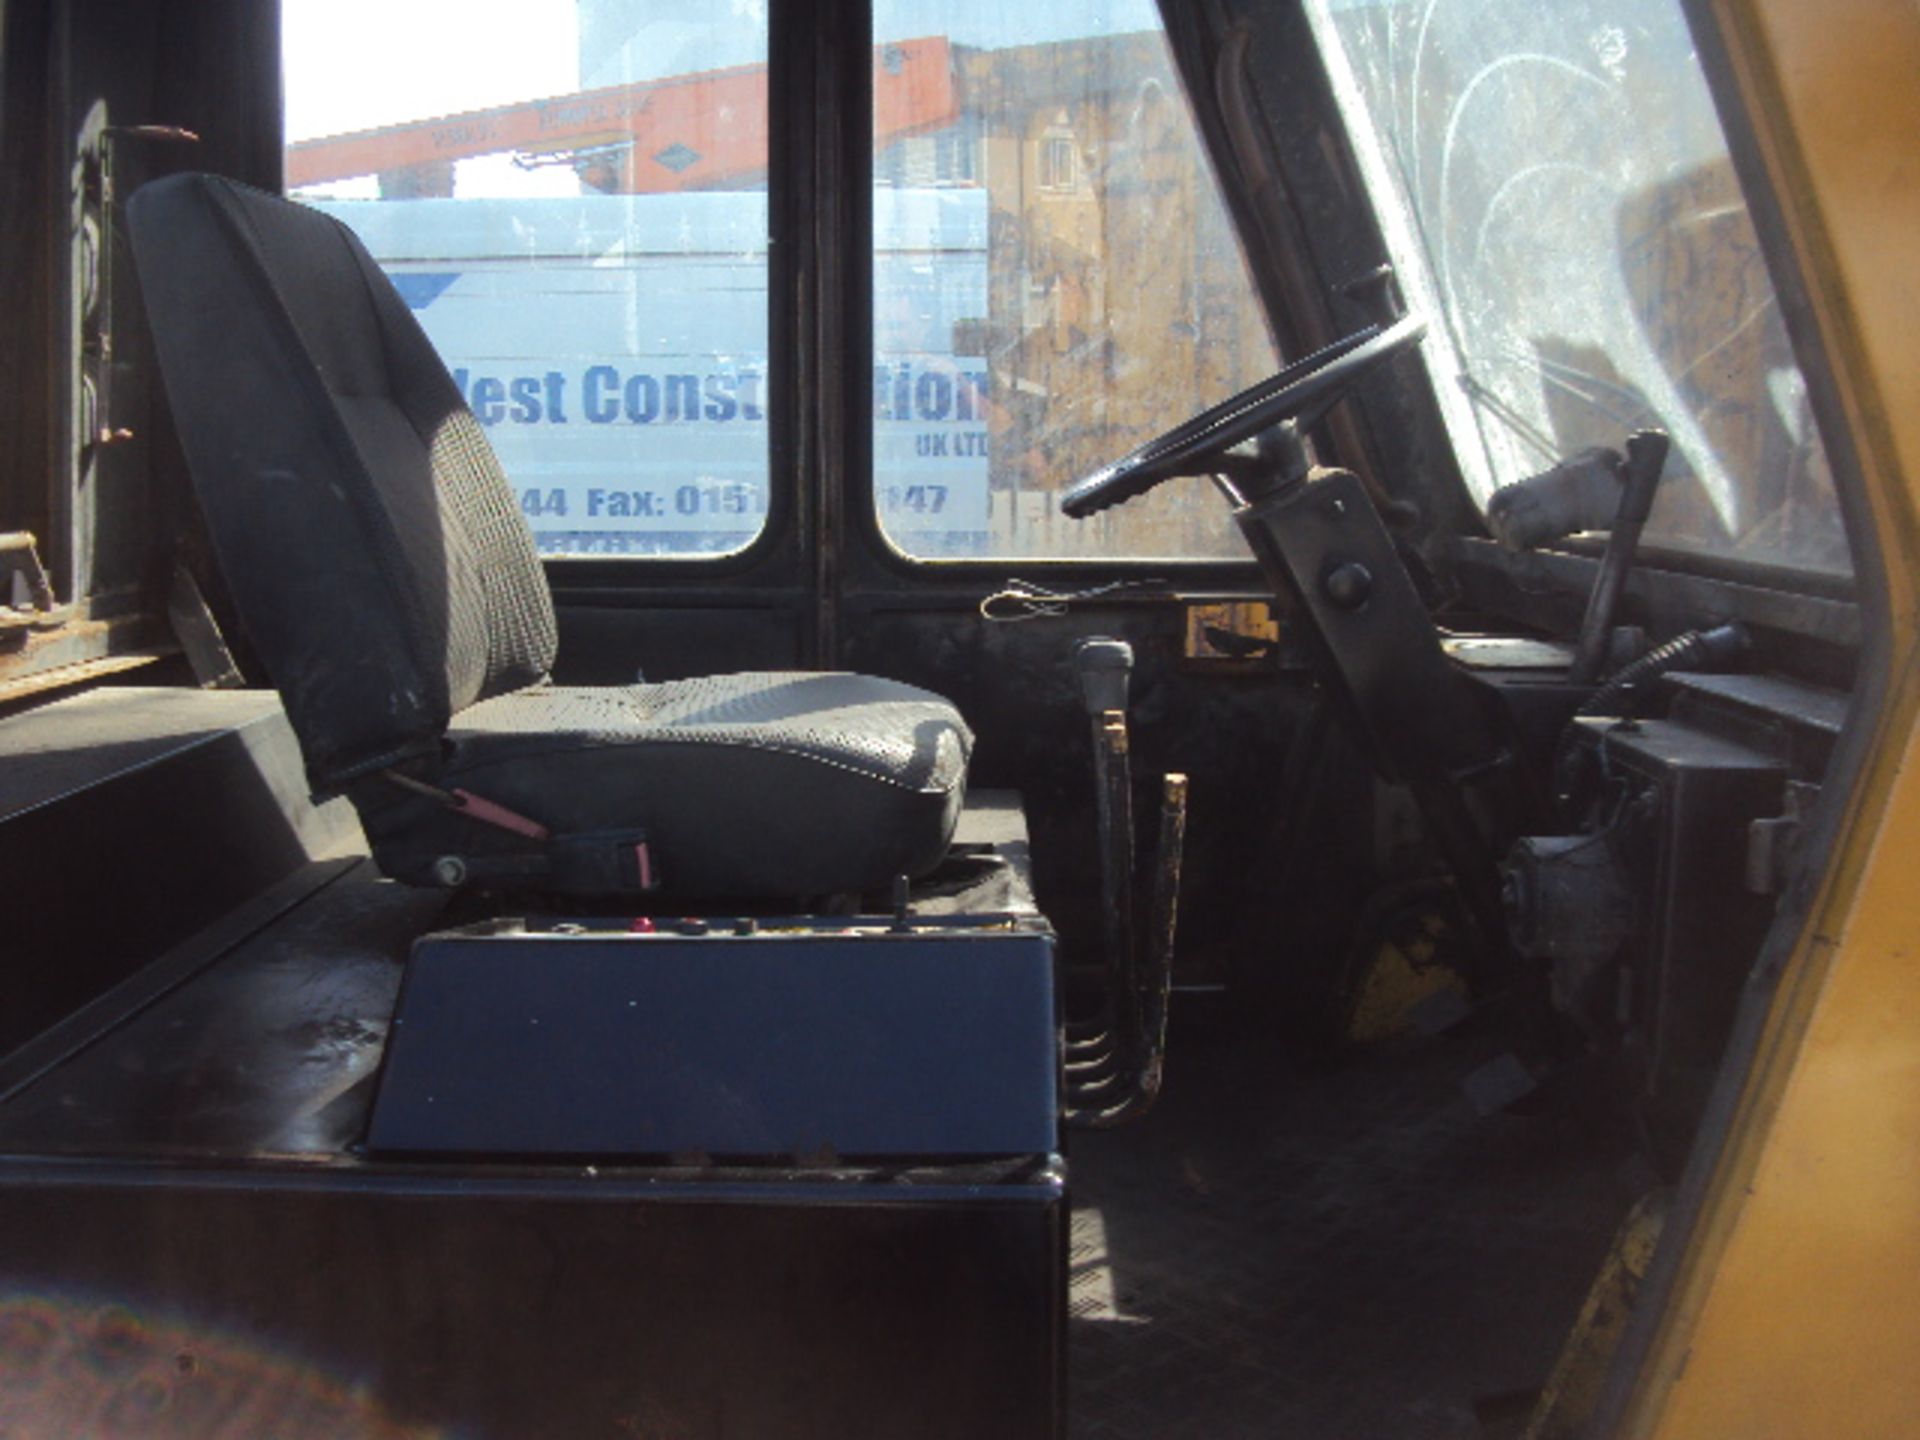 LANSING 7.40 4t diesel driven forklift truck with duplex free-lift mast (sold as not working) - Image 4 of 4